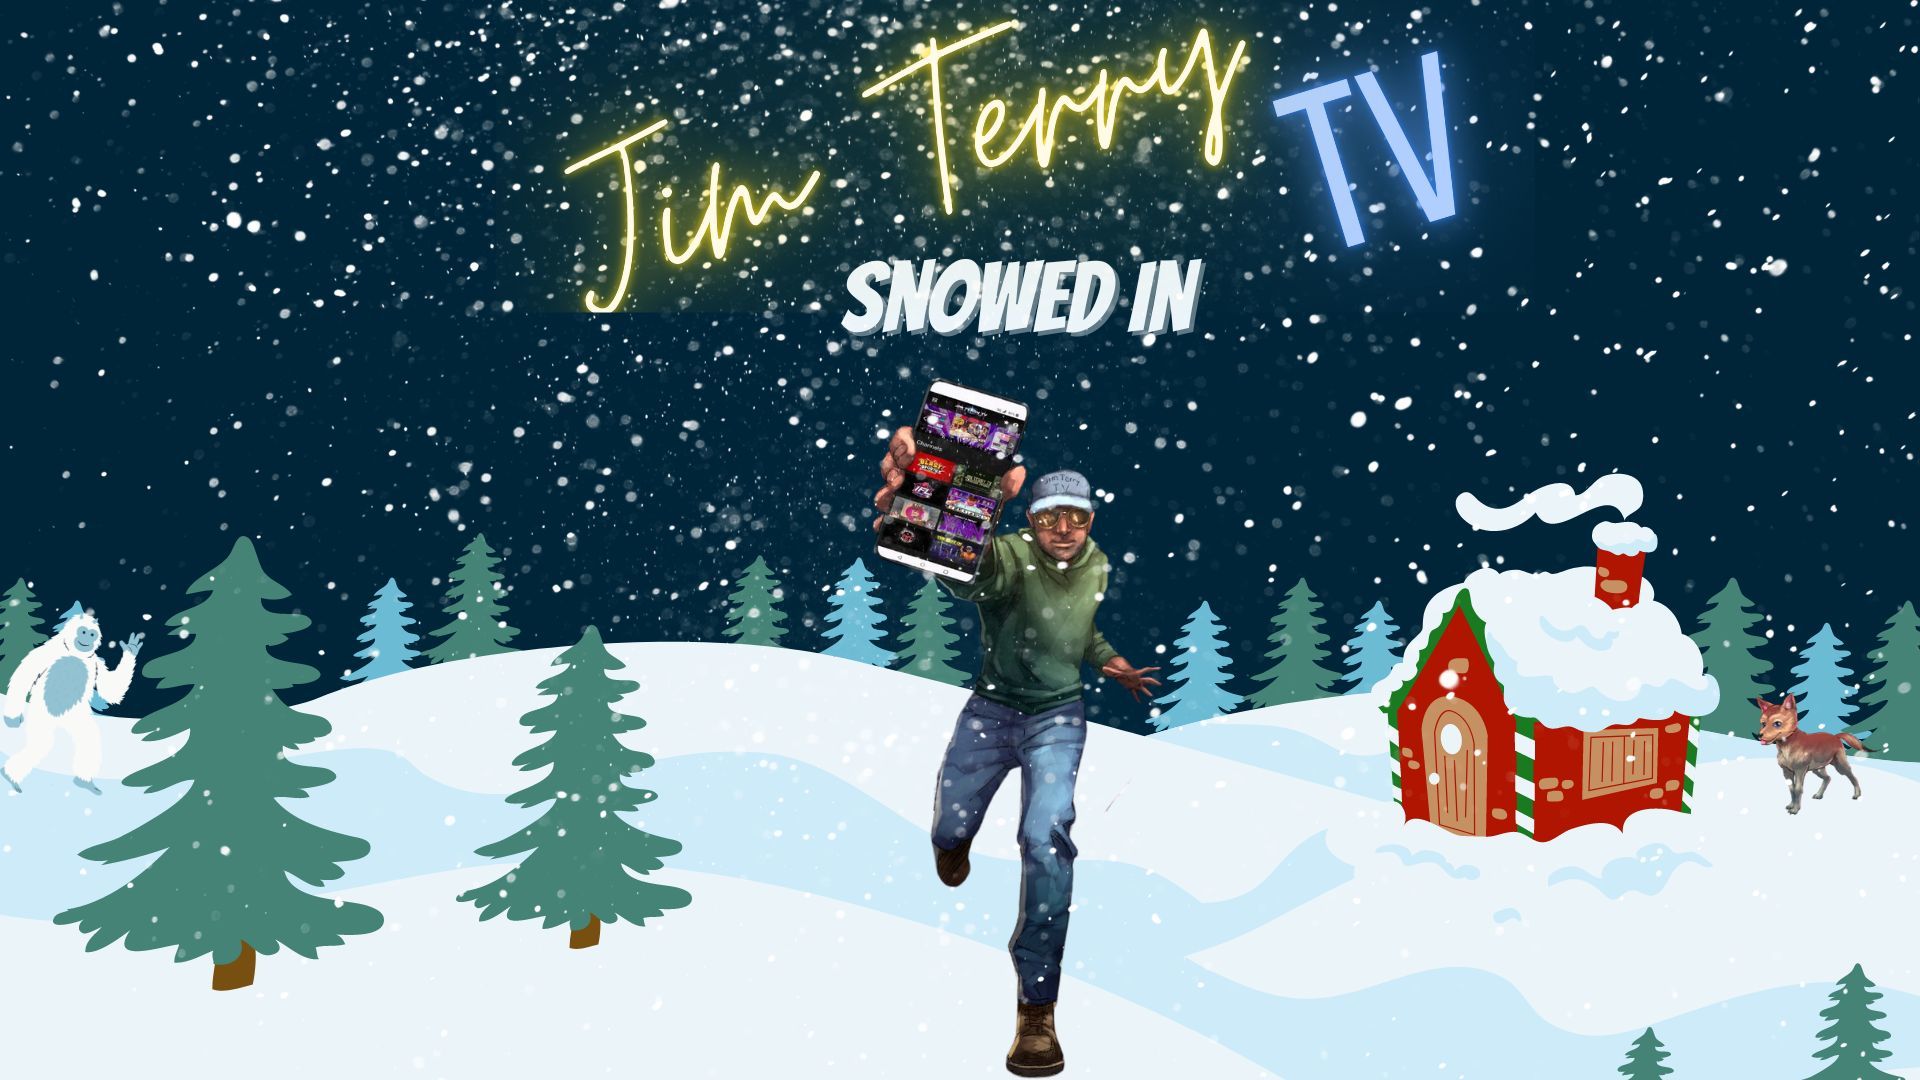 Jim Terry TV is SNOWED IN (S2:E5)